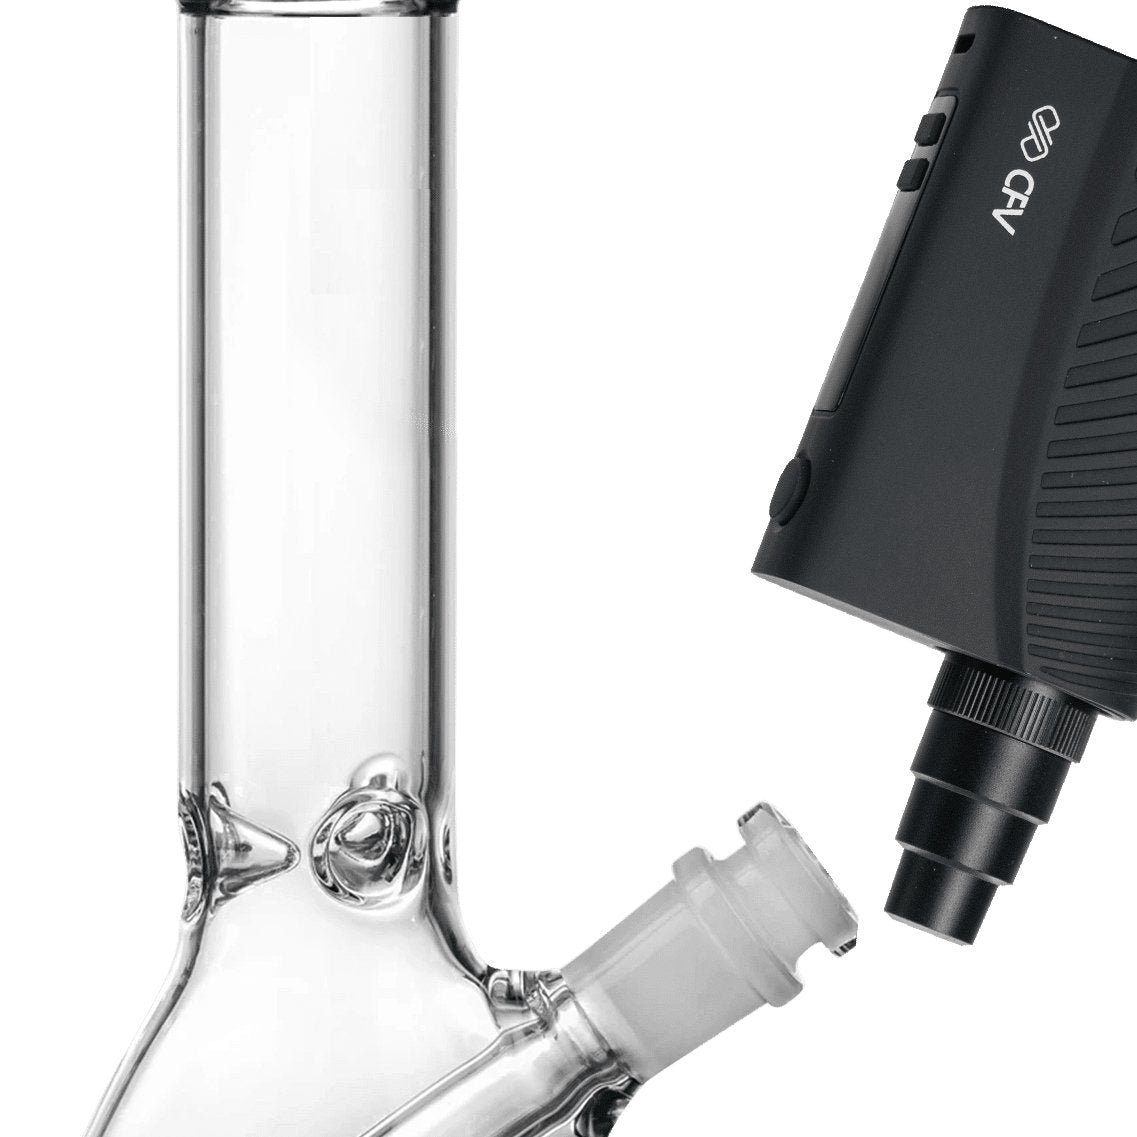 boundless cfv with waterpipe